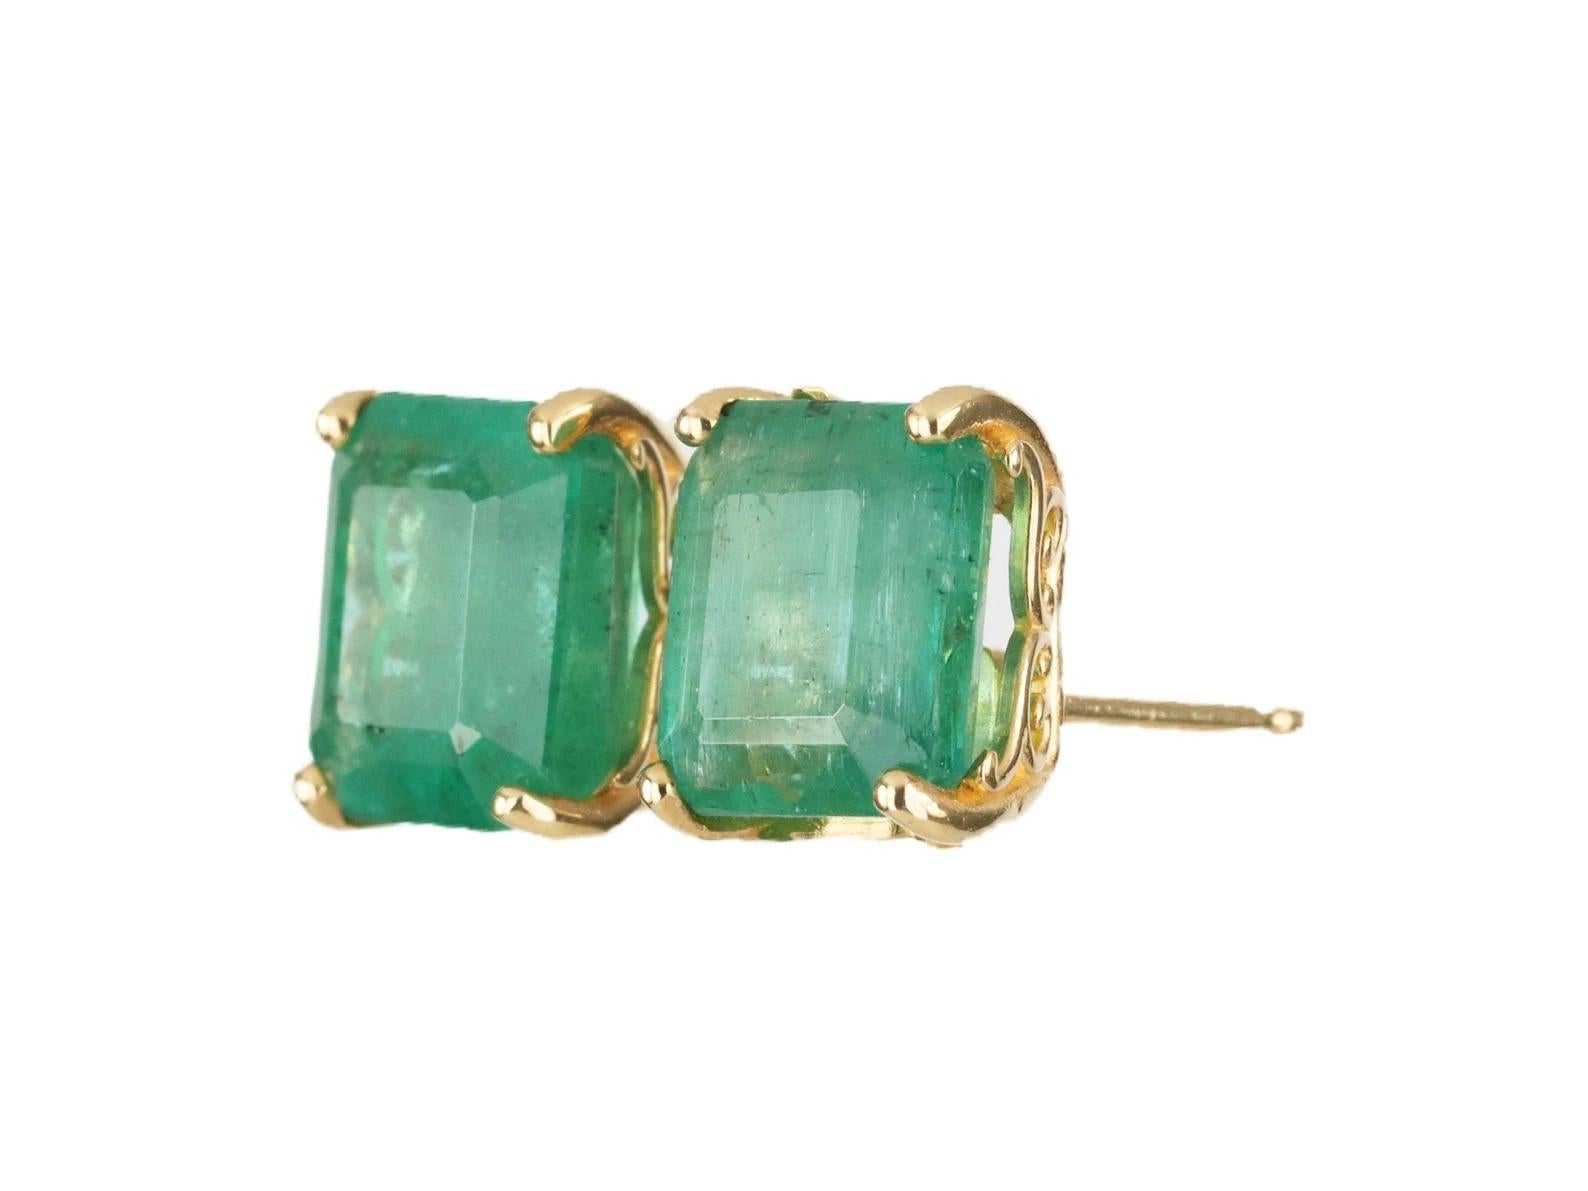 Featured here is a beautiful set of emerald cut- emerald studs in fine 14K yellow gold. Displayed are medium-green emeralds with good transparency, accented by a simple four-prong 14K gold mount, allowing for the emerald to be shown in full view.